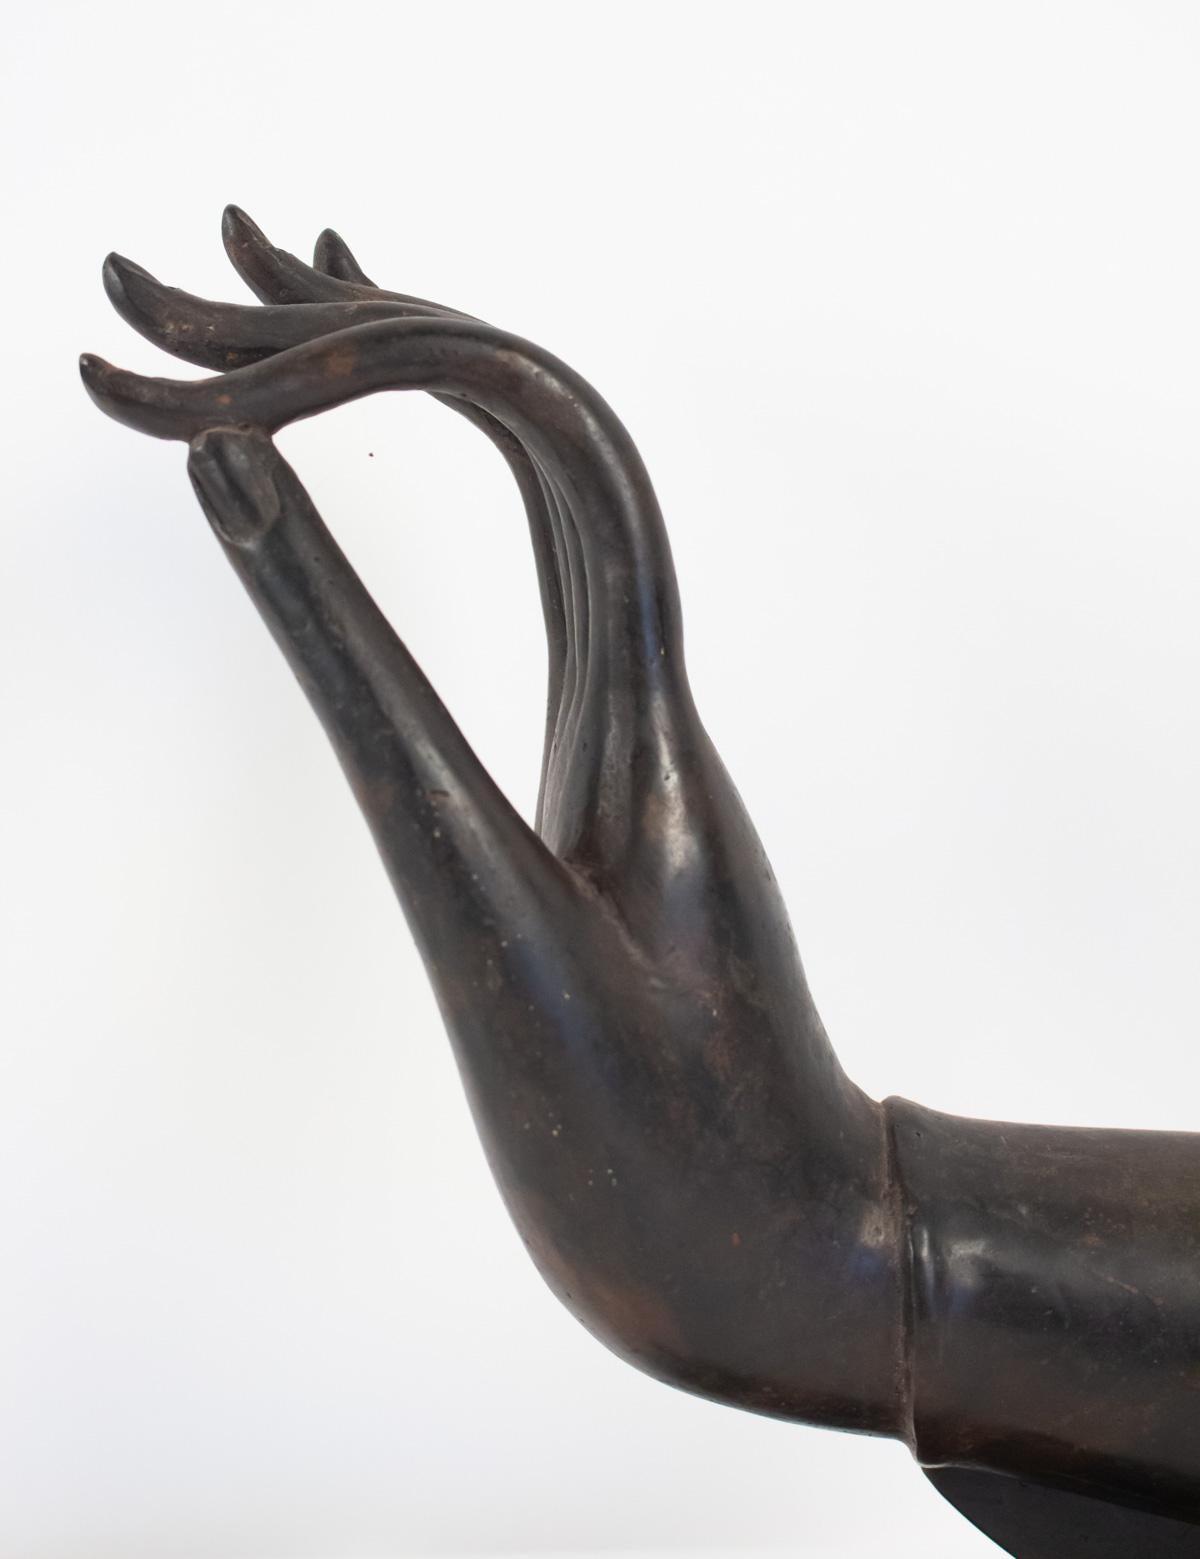 Buddha's right hand in bronze, Thailand, early 20th century.
Measures: H 30 cm, P 8.5, W 15 cm.